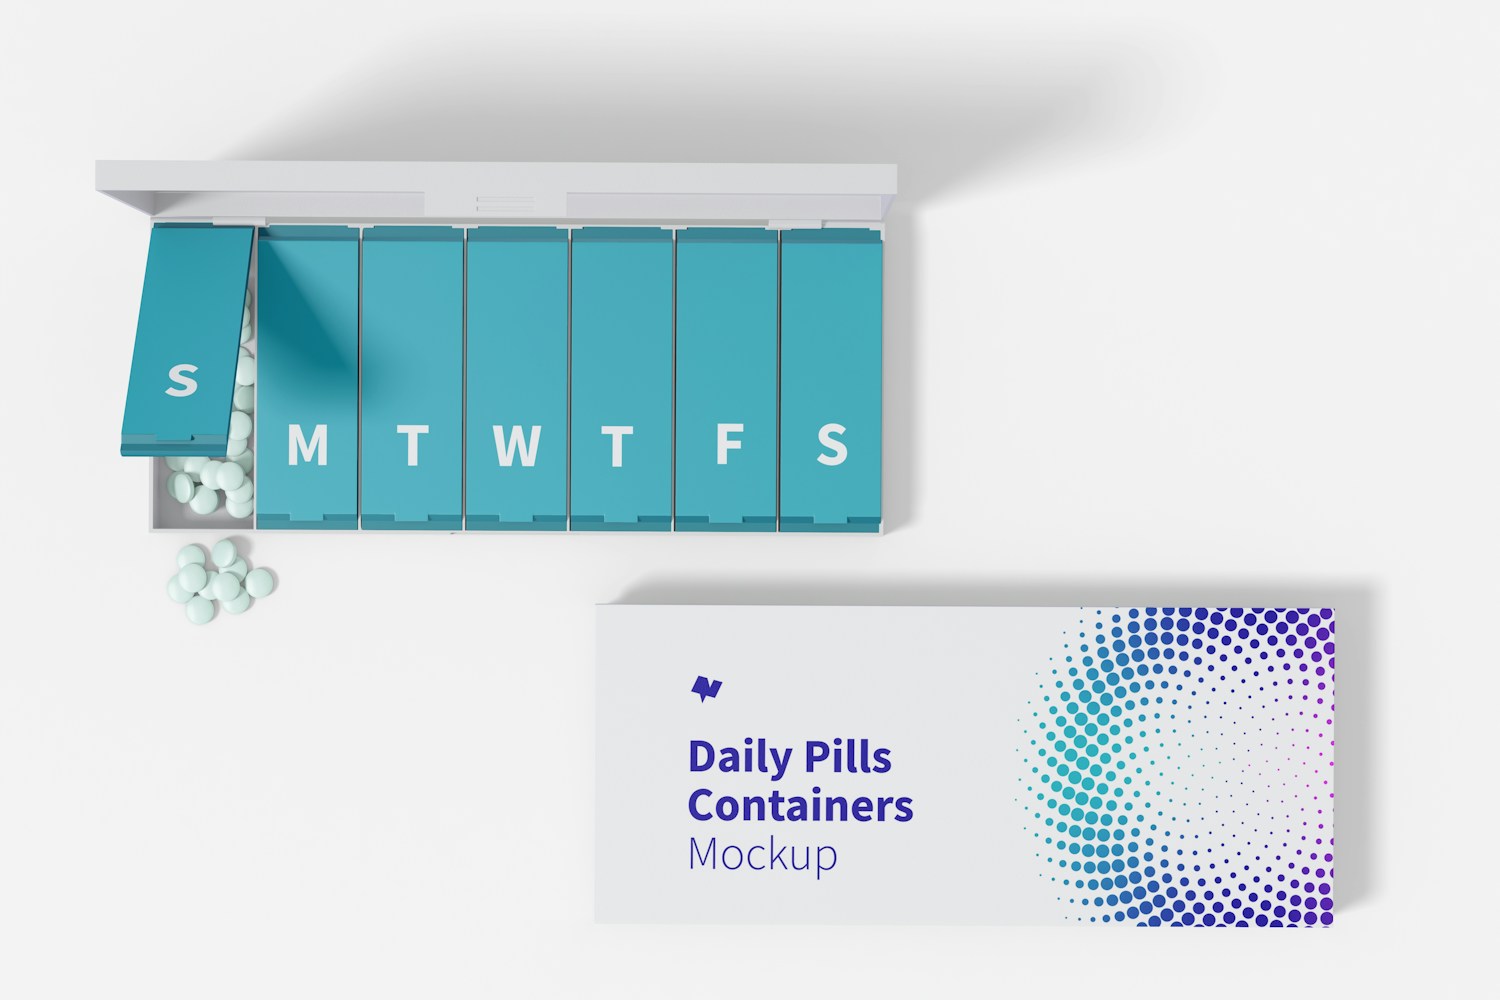 Daily Pills Containers Mockup, Top View